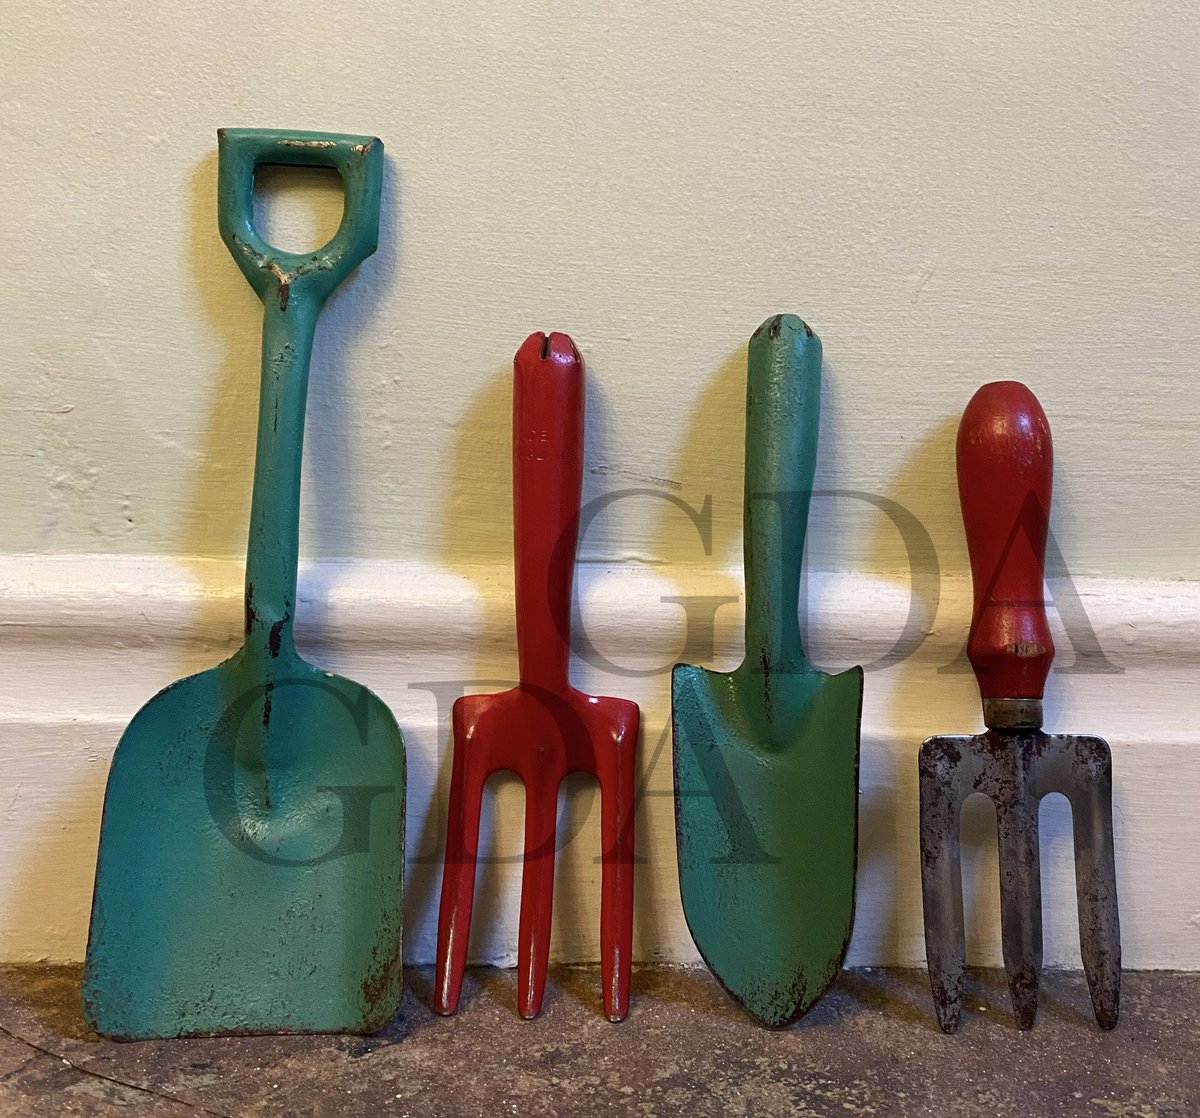 Good morning #earlybiz New items 💚♥️ A set of vintage children’s garden tools. £15 plus p&p See them and more at, Dieudonneart.com/antiques #elevenseshour #collectables #vintage #toys #collectables #gardening #shopindie #uniquegifts #Easter #green #red